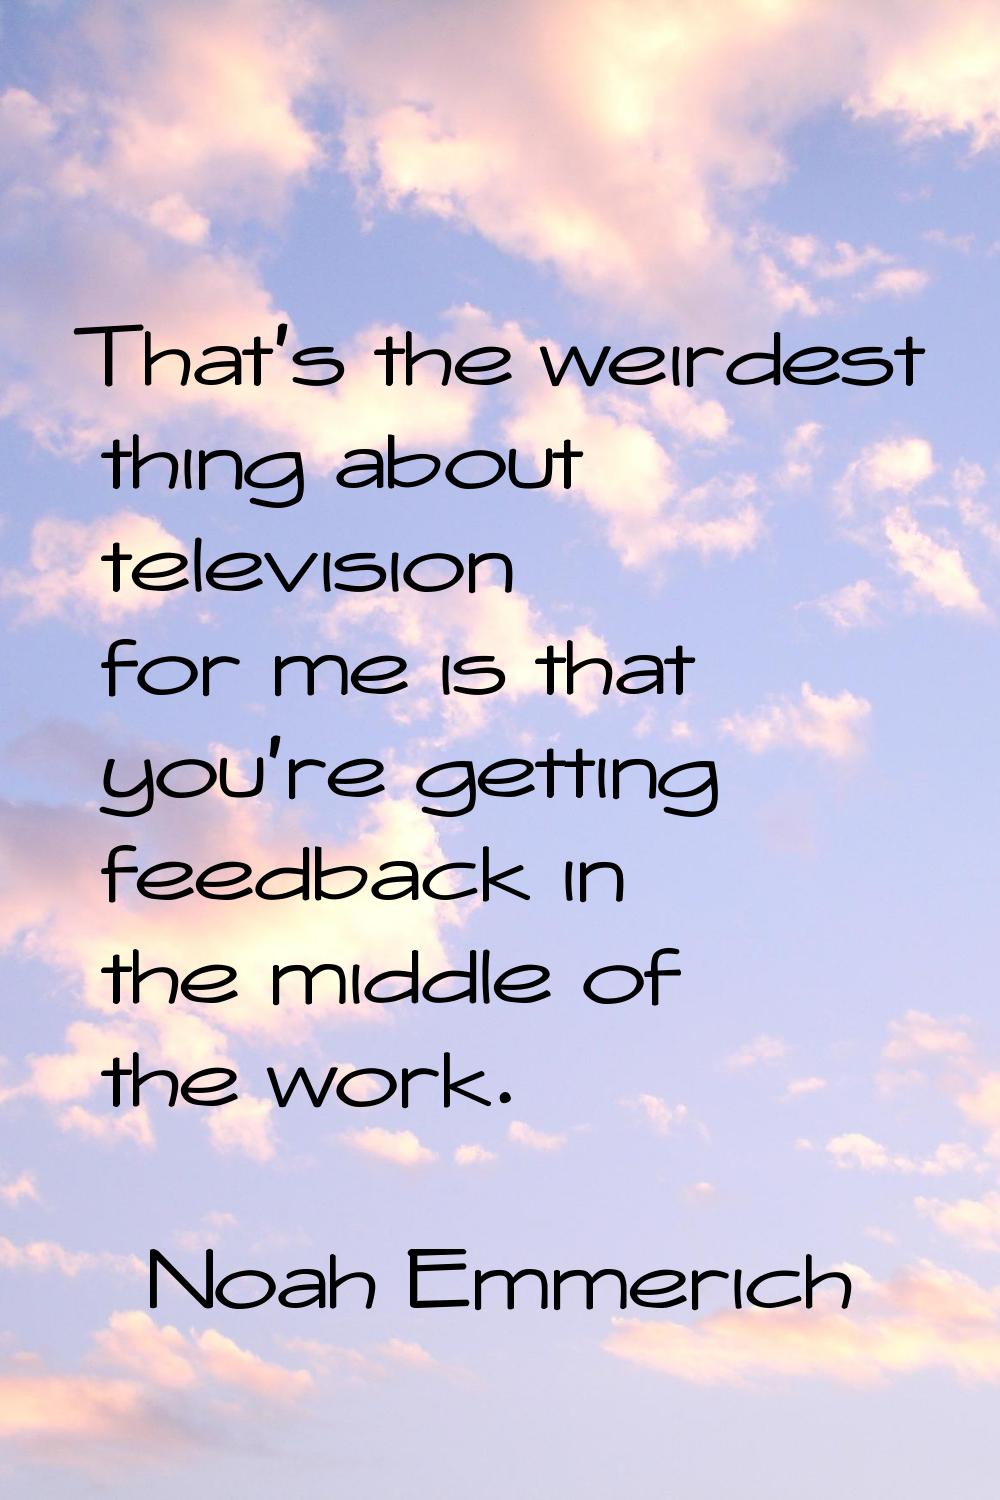 That's the weirdest thing about television for me is that you're getting feedback in the middle of 